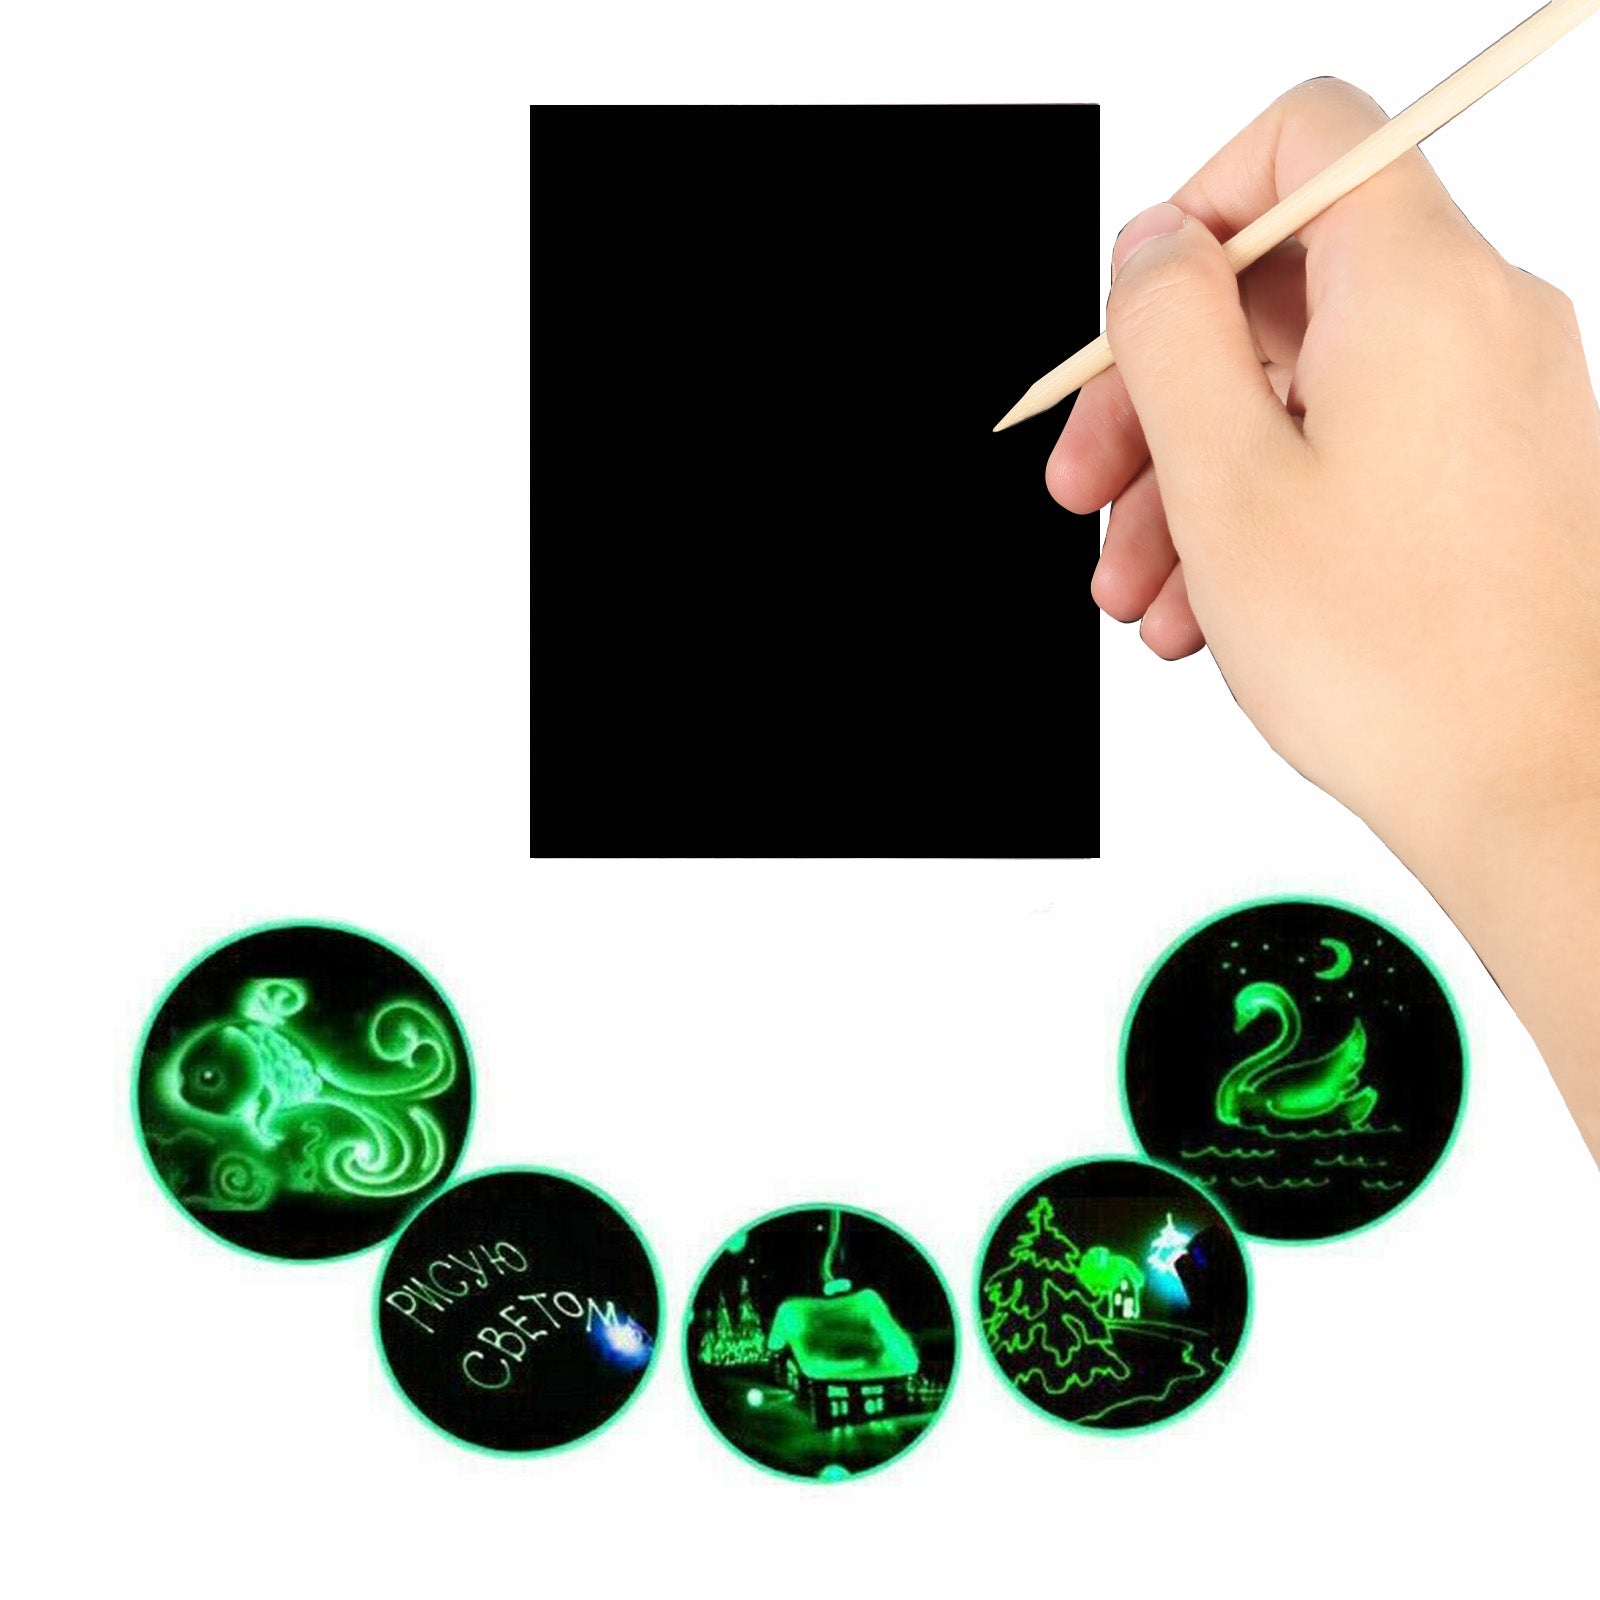 A hand holding a wooden stylus hovers over a black scratch sheet. Below, glowing green designs reveal an octopus, the words "Рисую светом" (drawing with light), a nighttime scene with a house, a swan on water, and a Christmas tree near a house. The precision resembles that of an engraver's touch achieved with the 50pcs A4 Luminous Scratch Paper Fluorescent Scratch for Falcon Laser Engraving by CrealityFalcon.